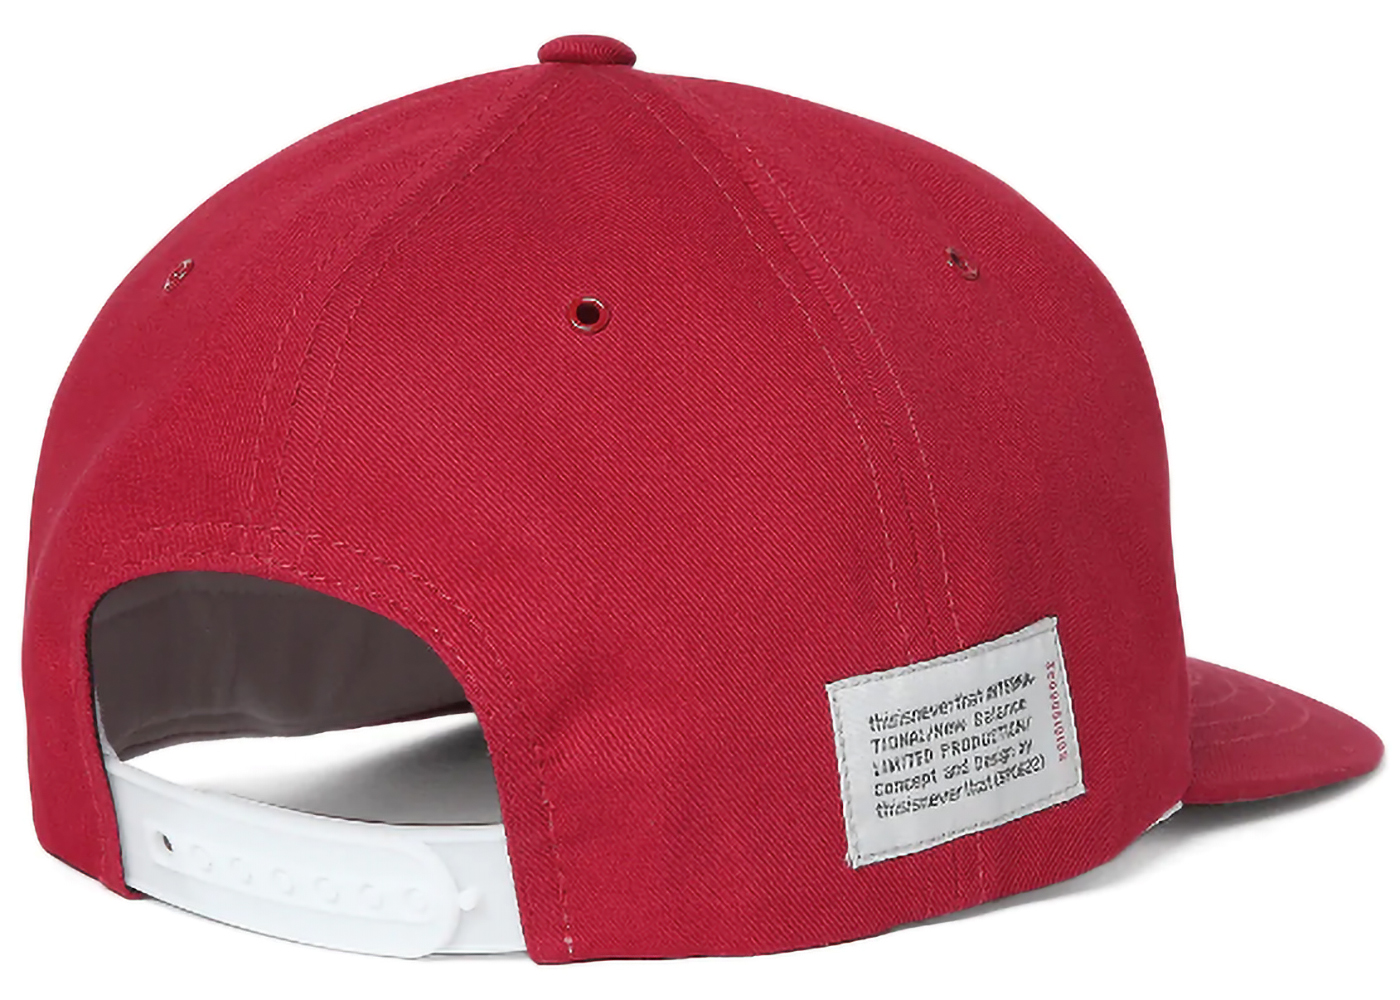 New Balance x Thisisneverthat Trucker Cap Red - SS22 - US